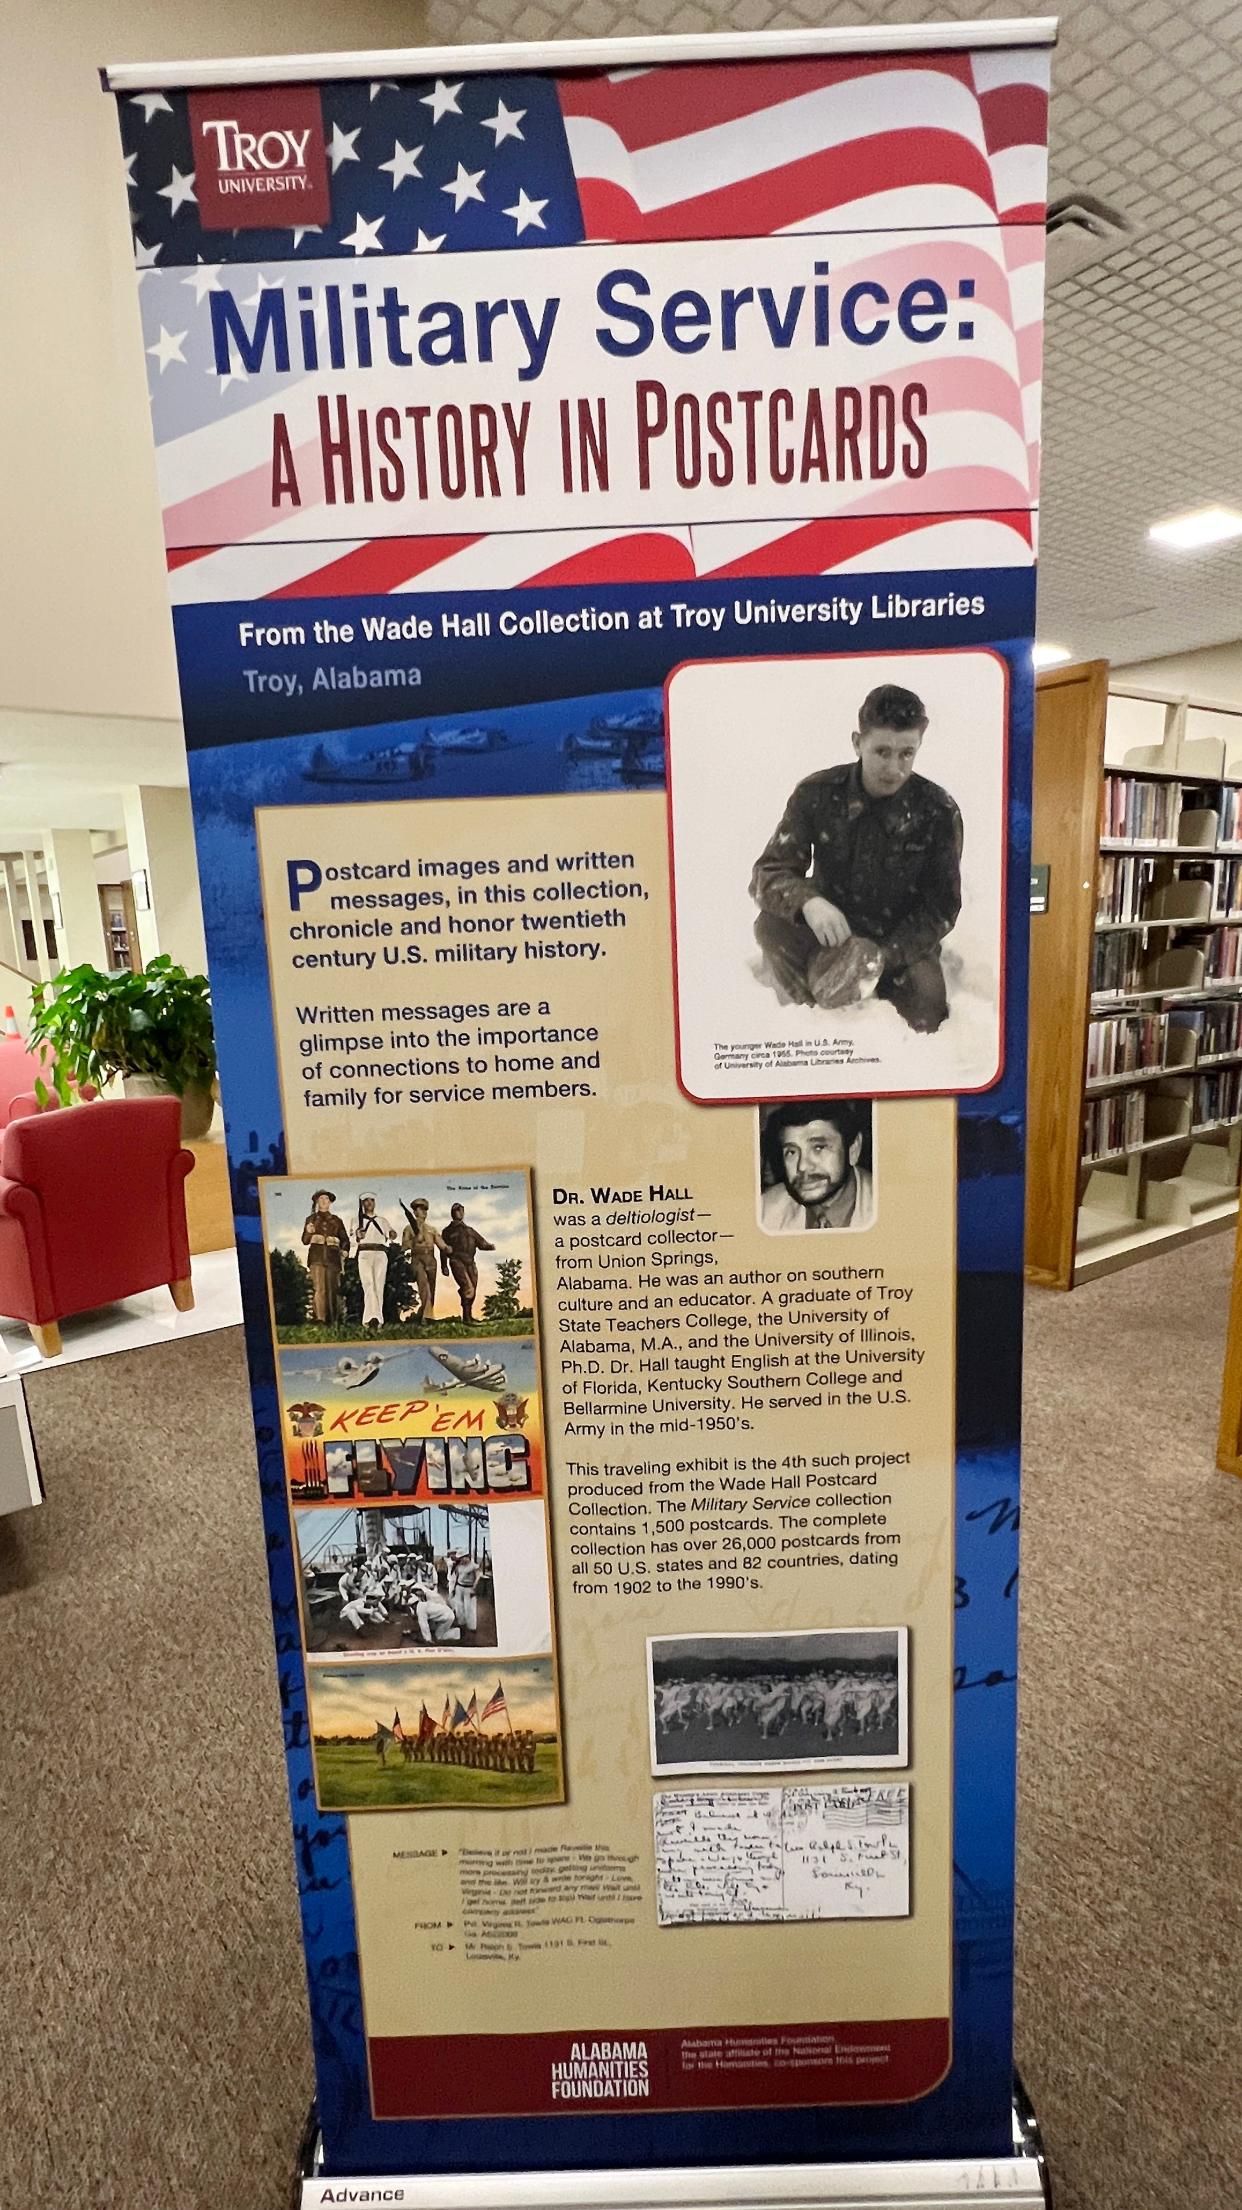 “Military Service: A History in Postcards" is a traveling exhibit from Troy University, and is on display through Christmas at the Gadsden Public Library. It includes representations of 1,500 postcards spanning more than three generations of military service, 1903 to 1966, on eight double-sided panels.